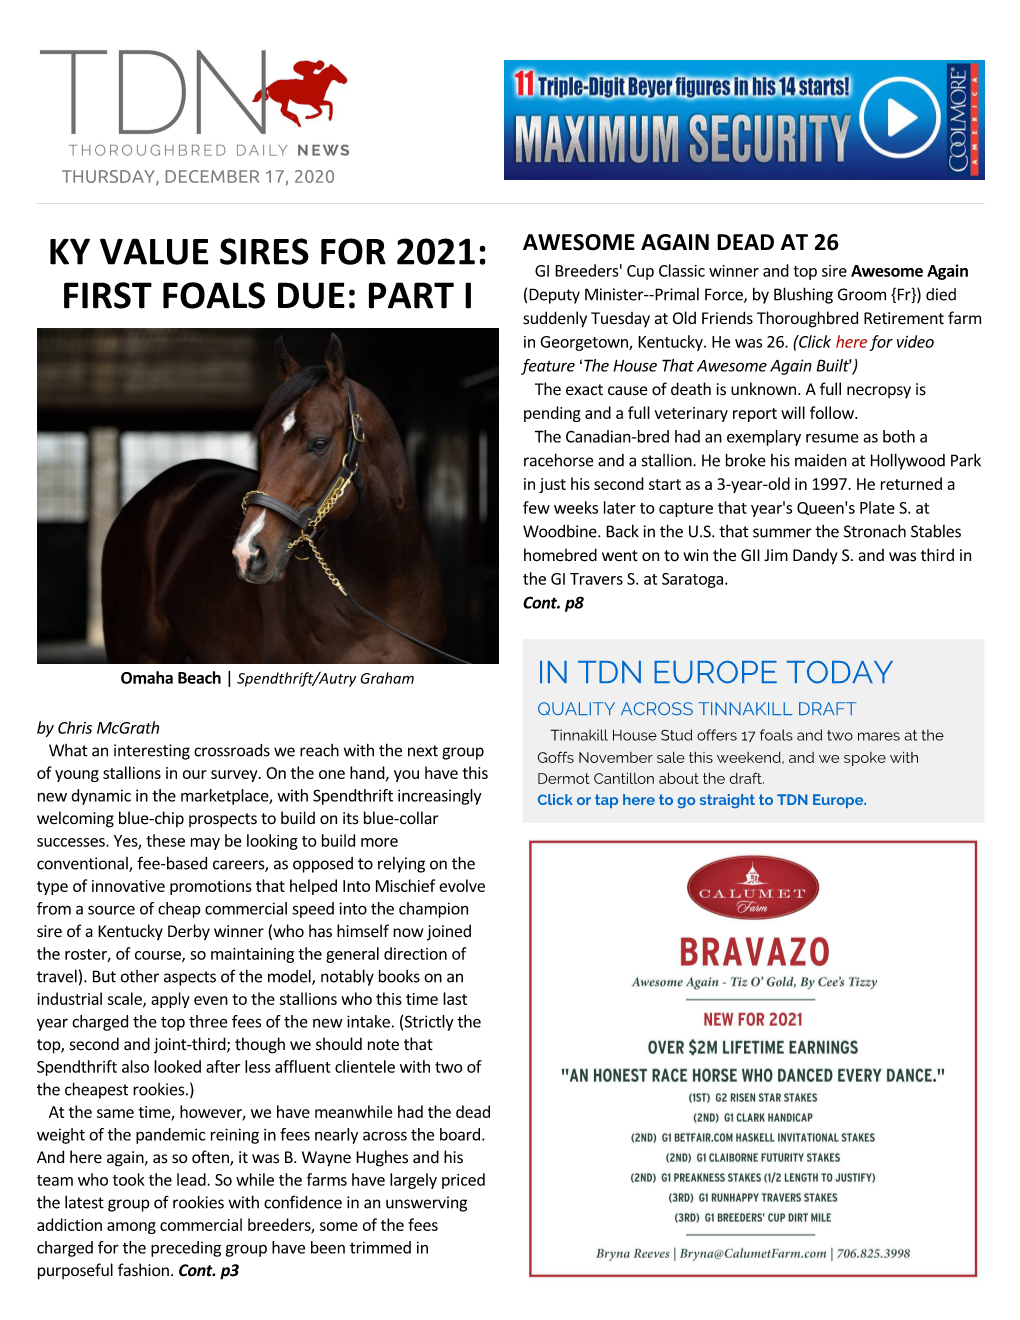 Ky Value Sires for 2021: First Foals Due: Part I